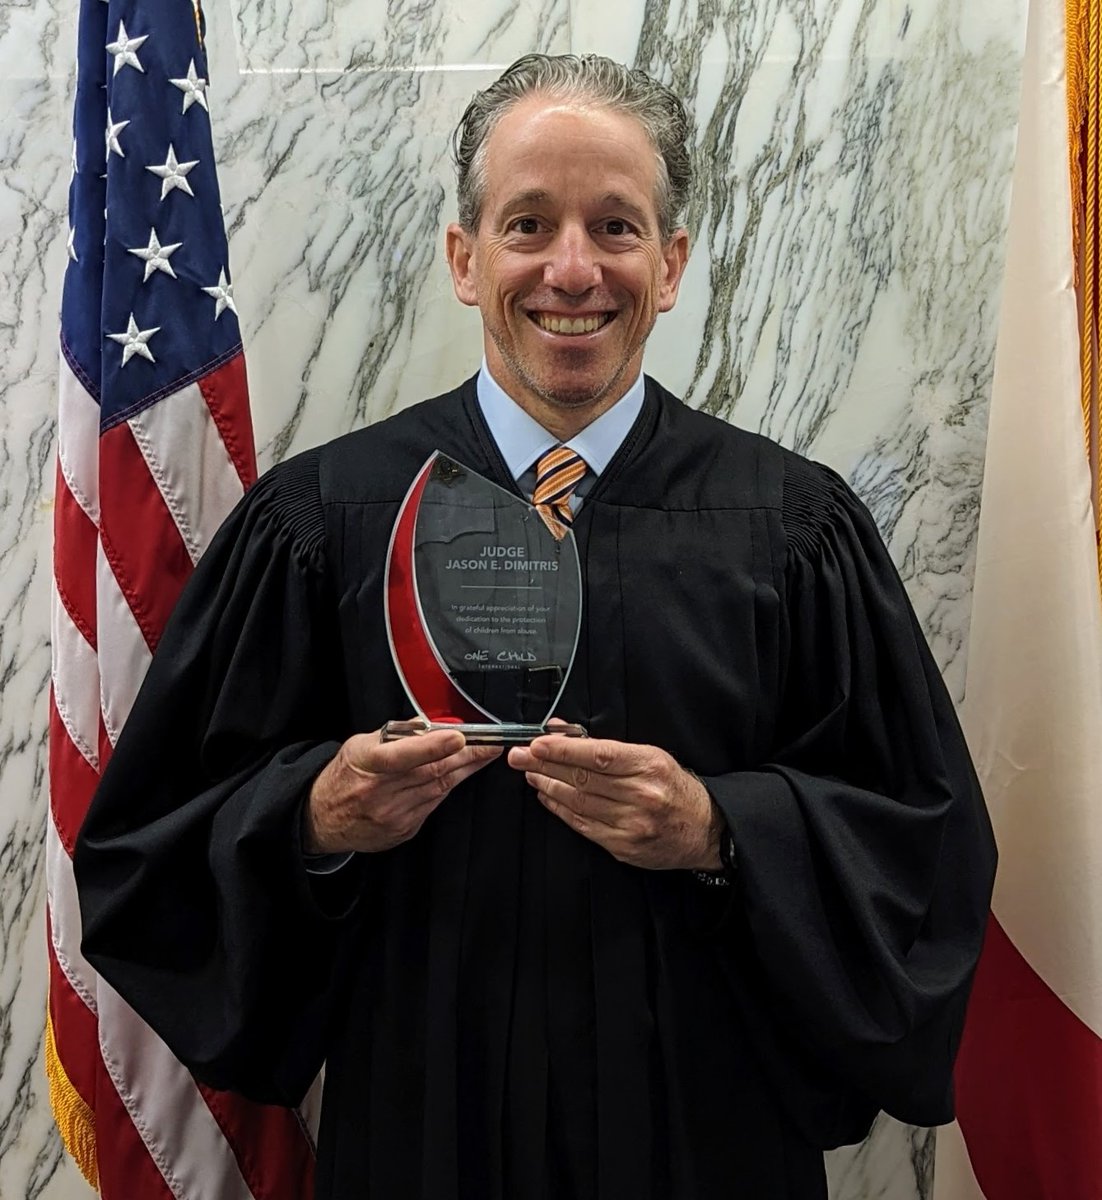 #Congratulations to Unified Children’s Court Judge Jason Dimitris on receiving the One Child International Child Protection Award this past week. This award is presented in gratitude to those whose work protects children from abuse, making lasting impacts in their lives.